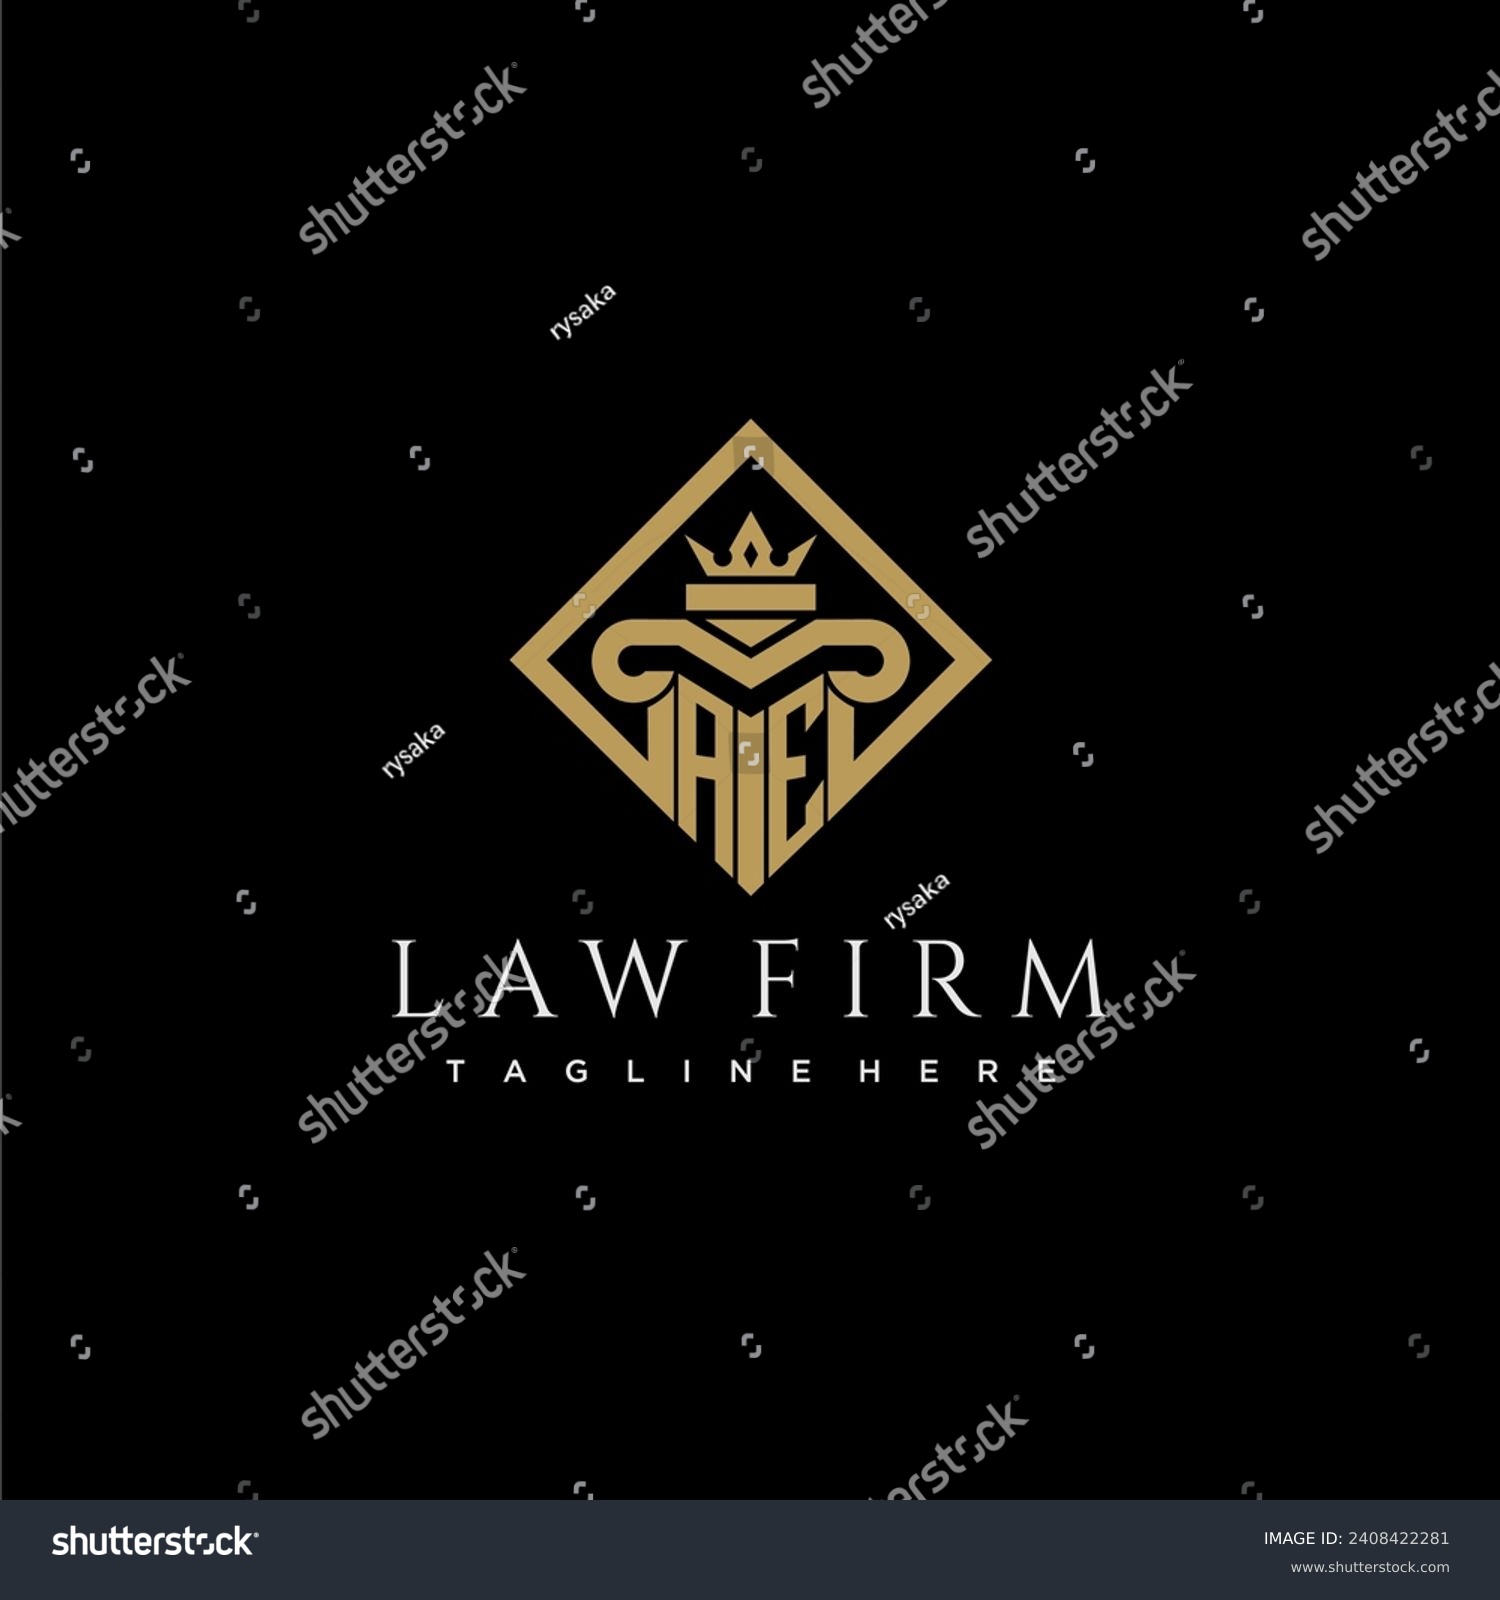 SVG of AE initial monogram logo for lawfirm with pillar in creative square design svg